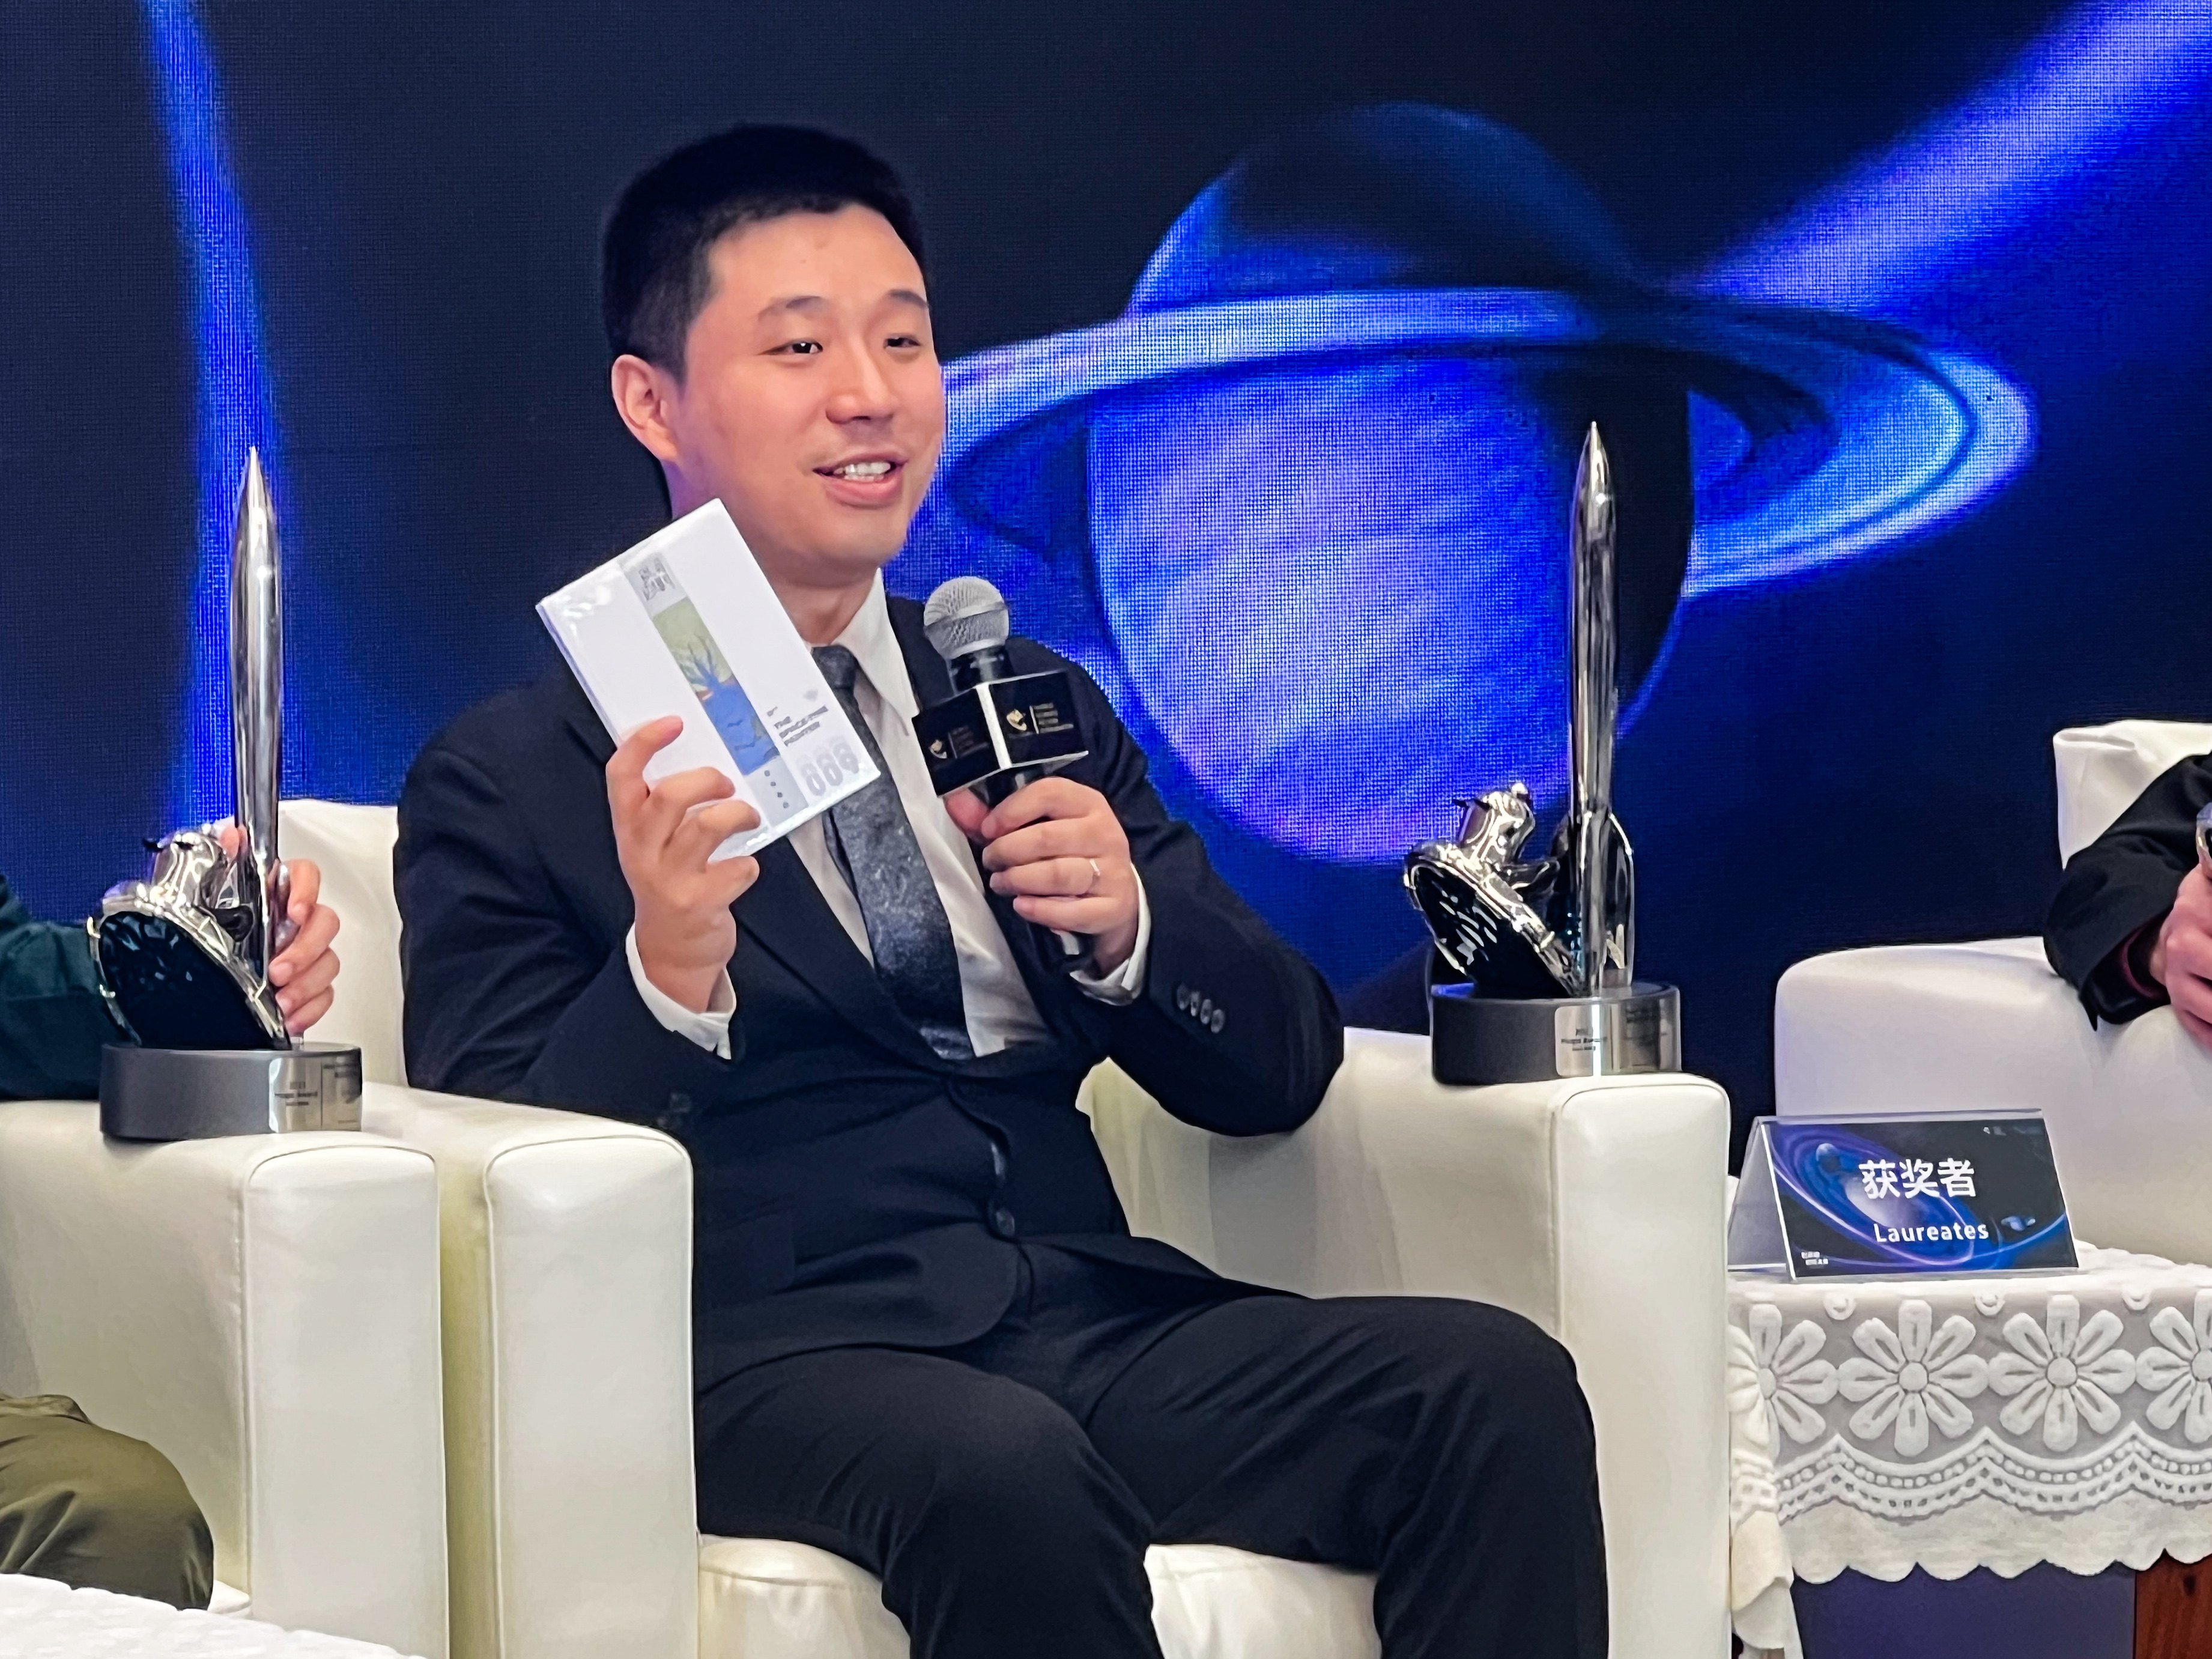 By day, Hugo Award-winning Chinese author Hai Ya is a financial services worker in the southern city of Shenzhen. Photo: Xinhua